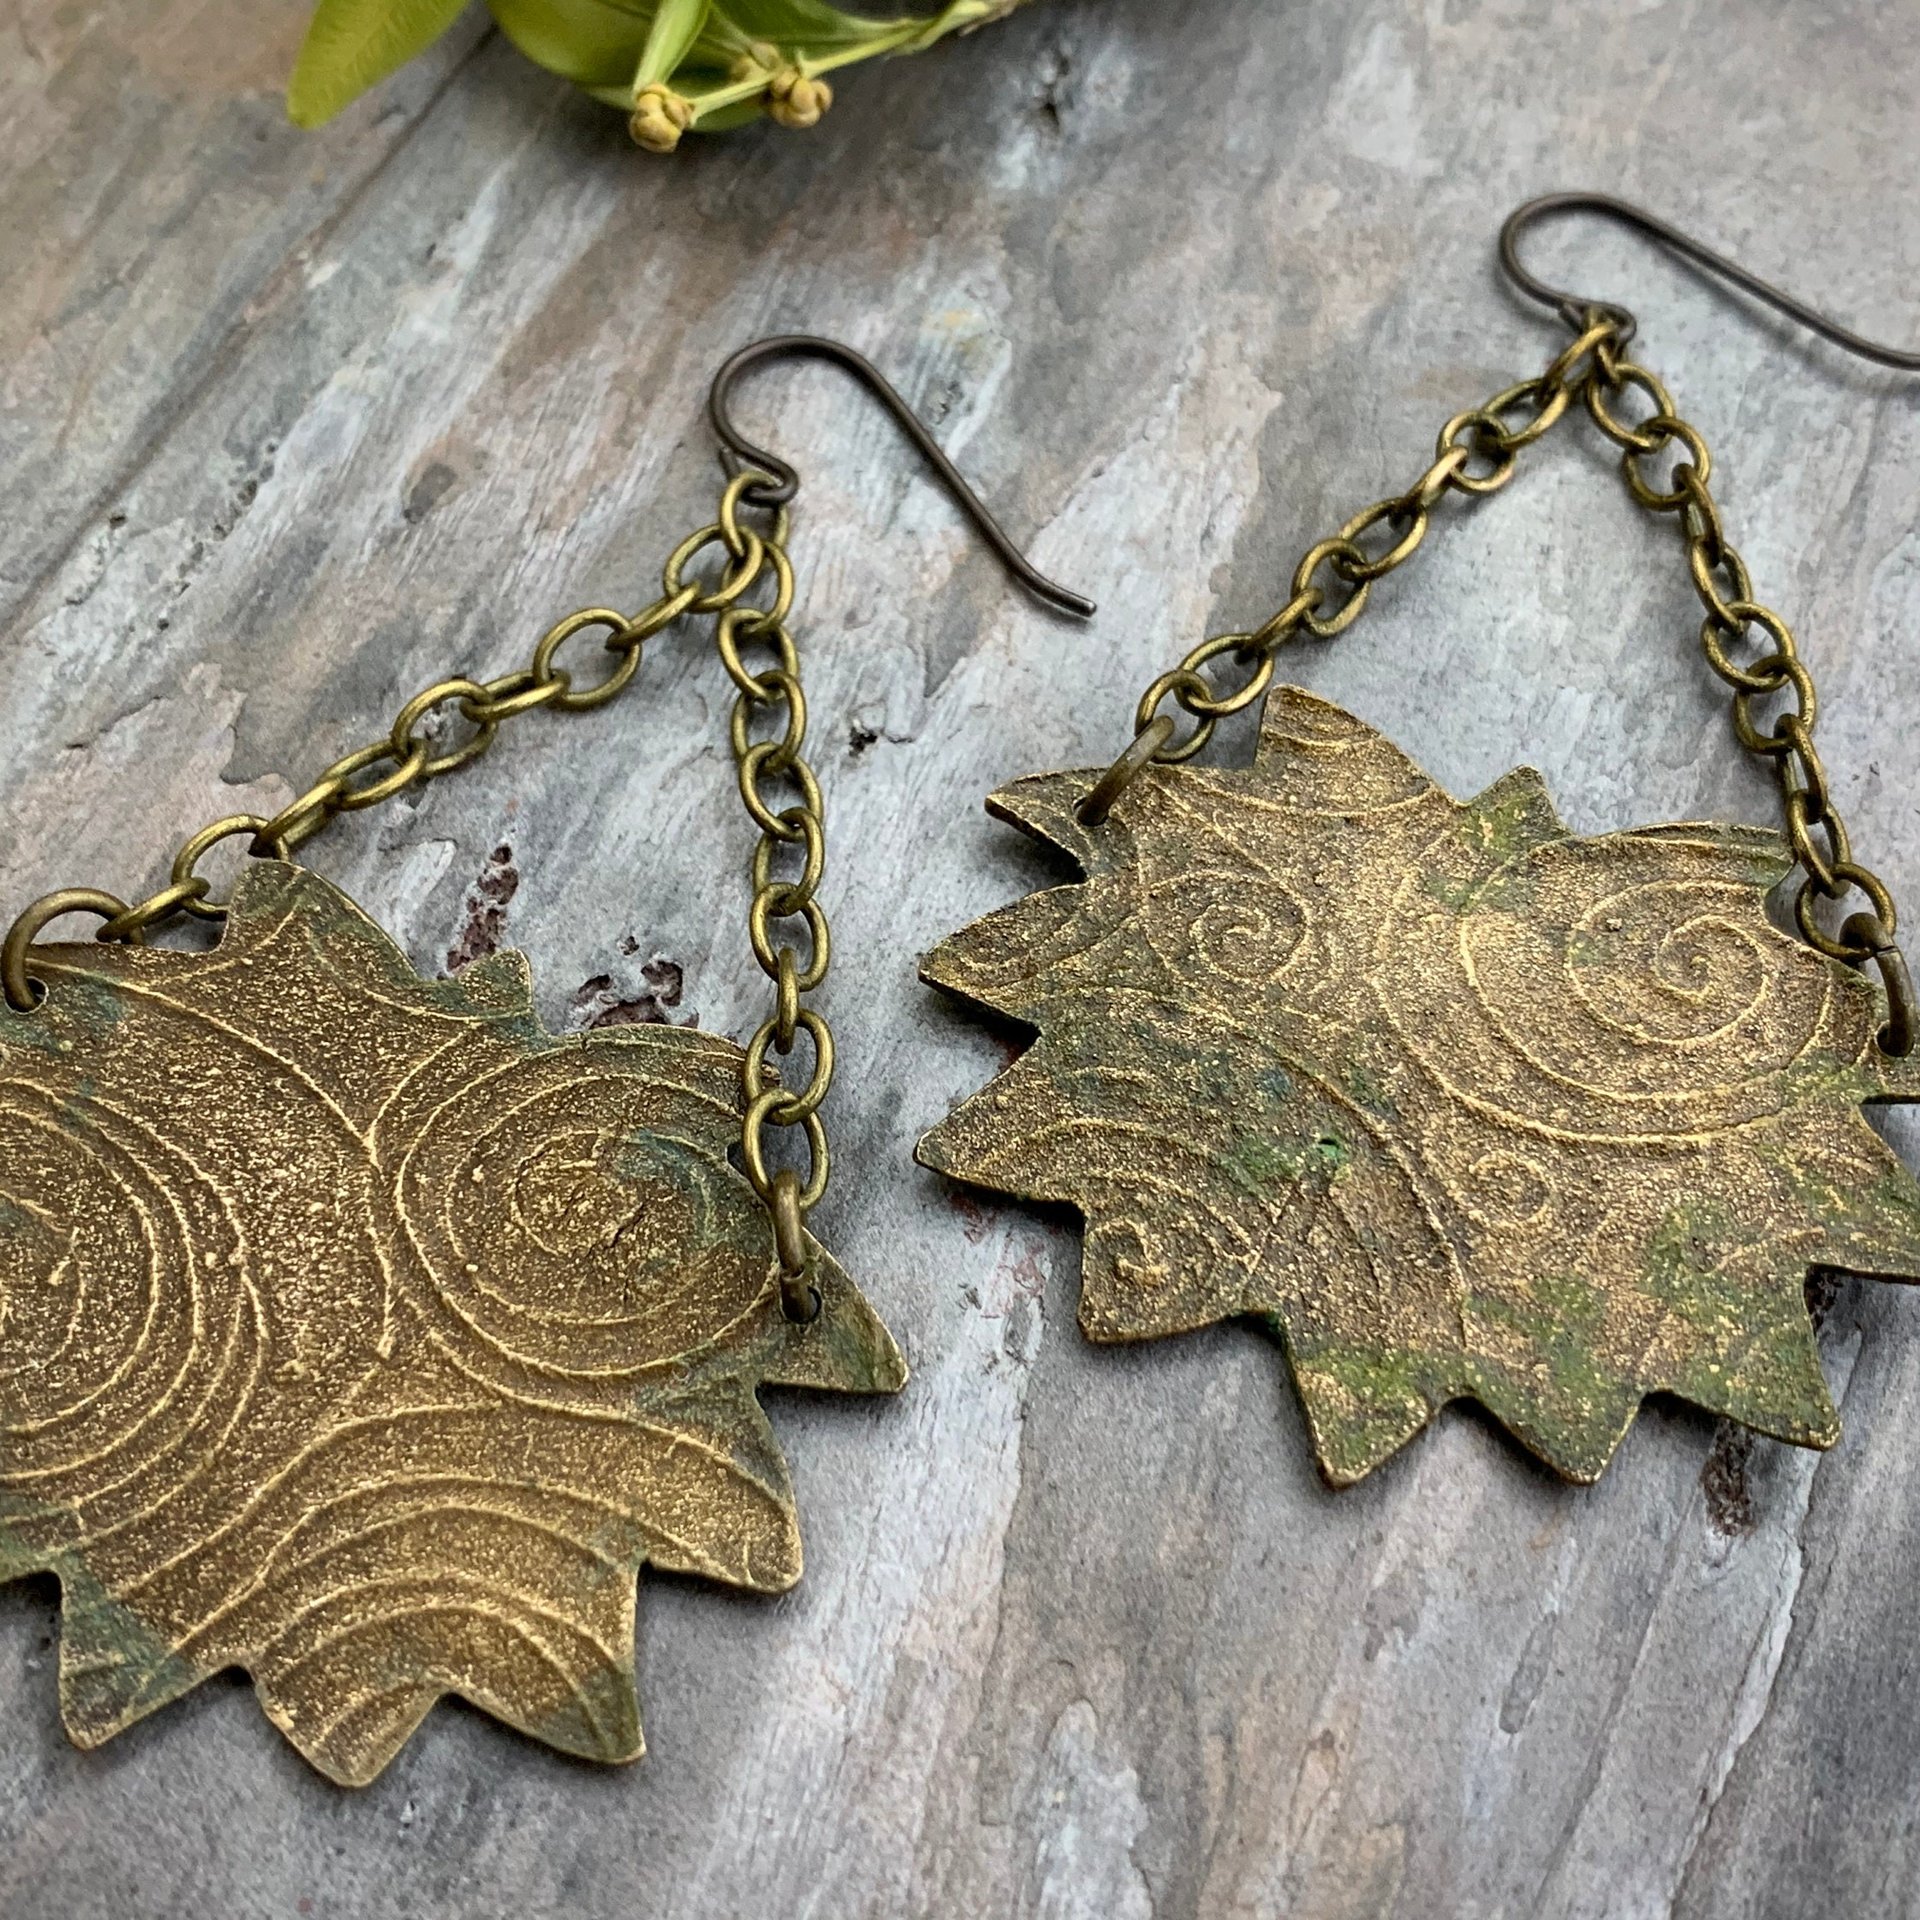 Lotus & Chain Earrings, Bronze Verdigris Patina, Large Statement Earrings, Hand Carved, Hypoallergenic Ear Wires, Handmade Art Jewelry